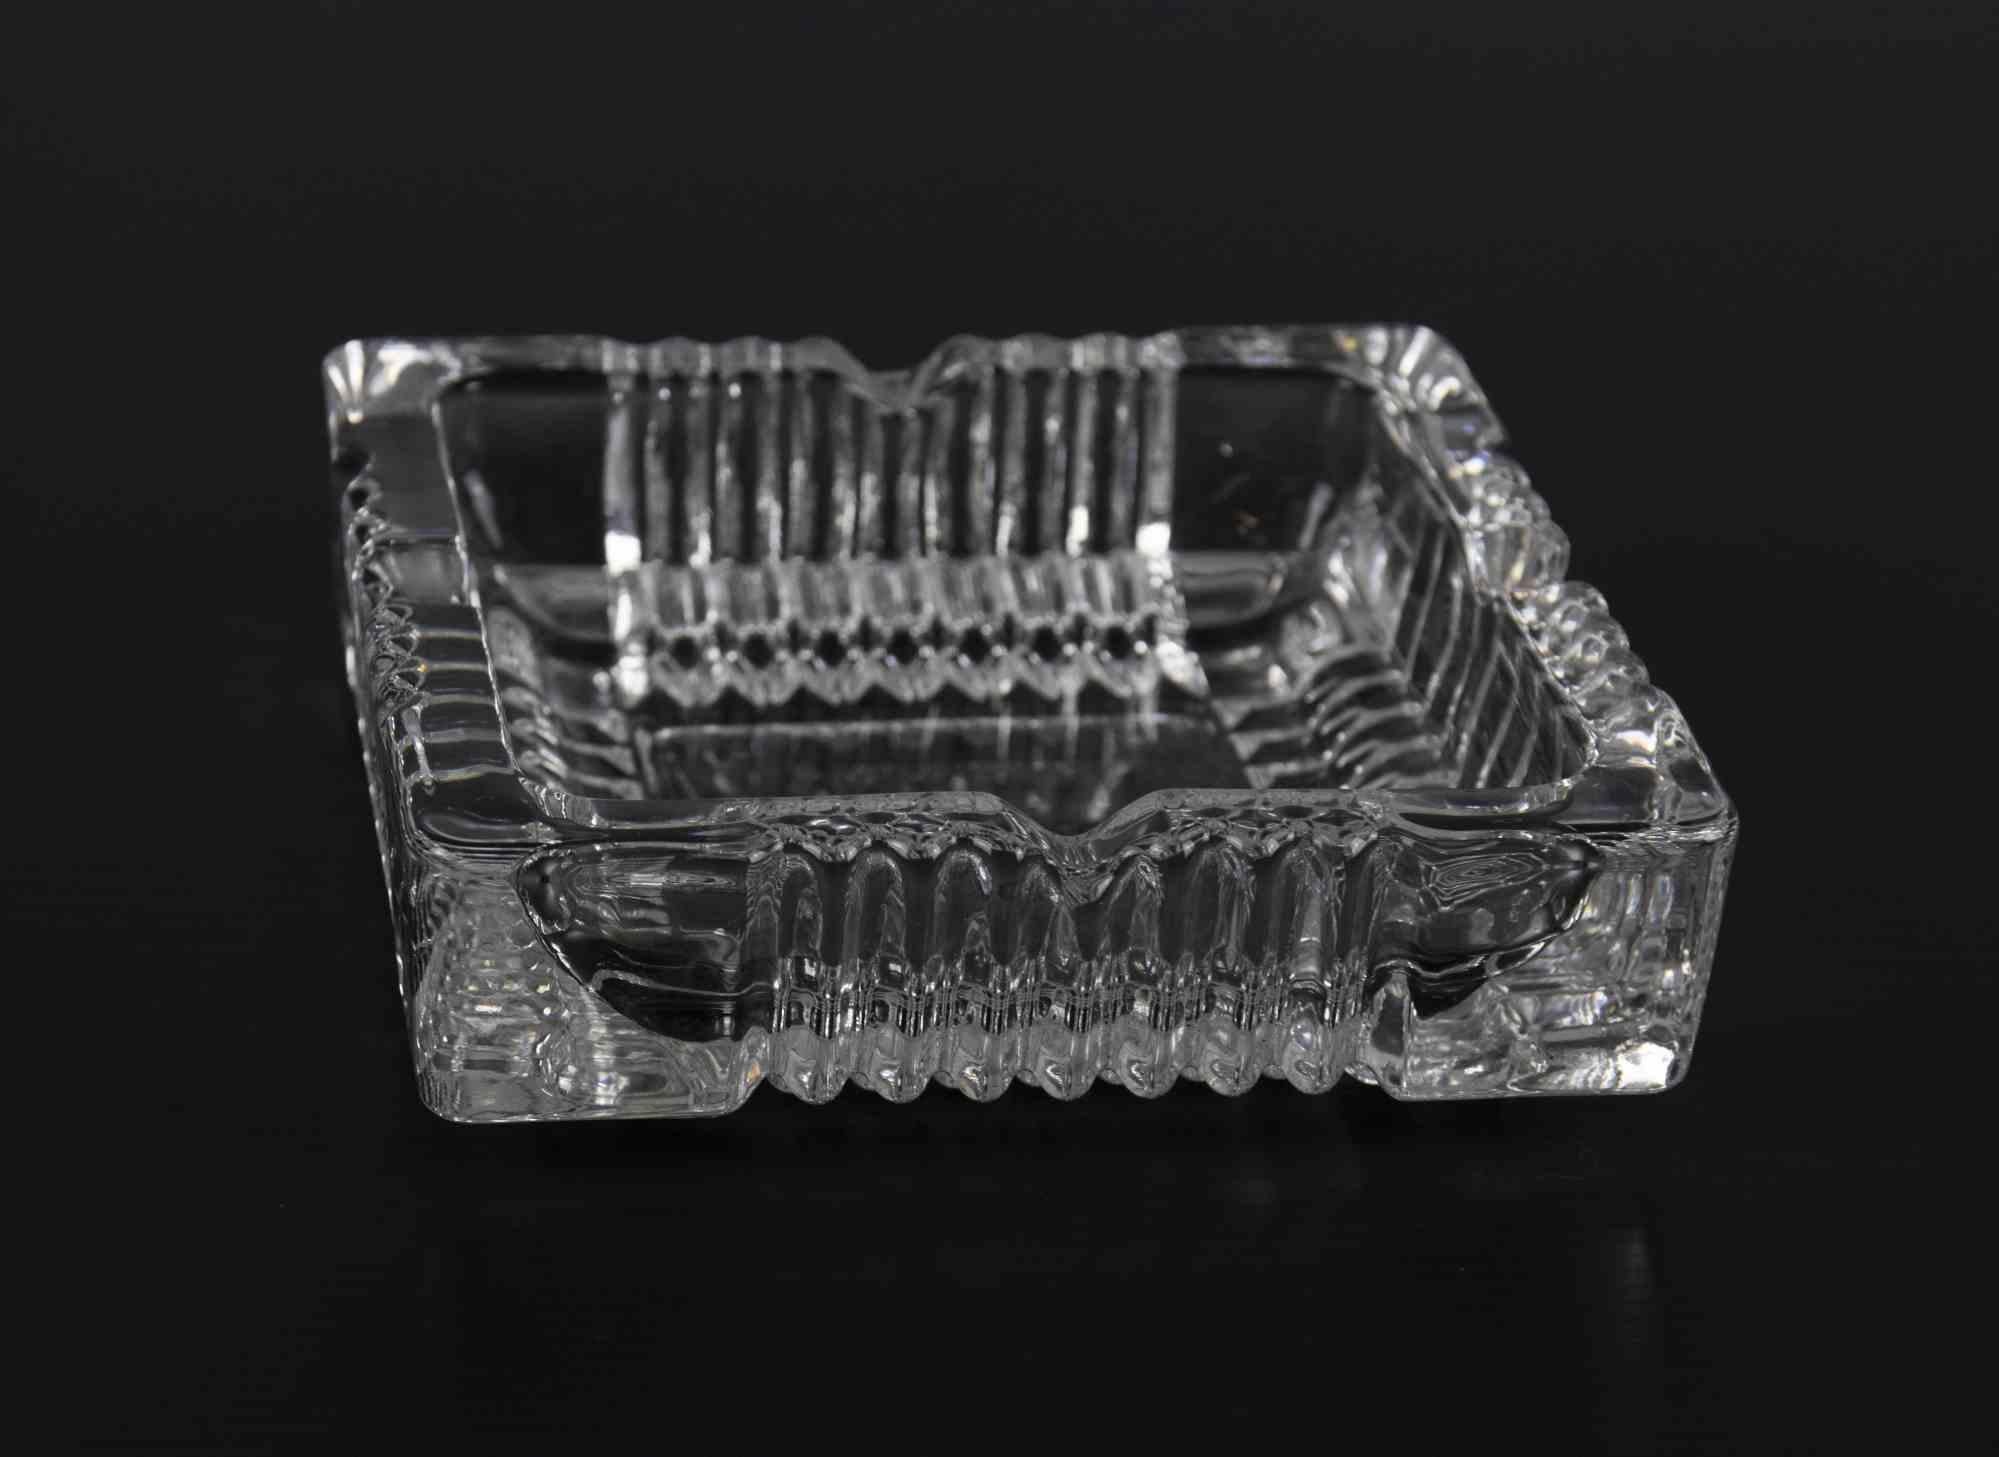 Glass vintage ashtray is an original decorative object realized in the 1970s.

Original art glass.

Made in Italy.

Dimensions: 14 x 15 cm. 

Perfect conditions.